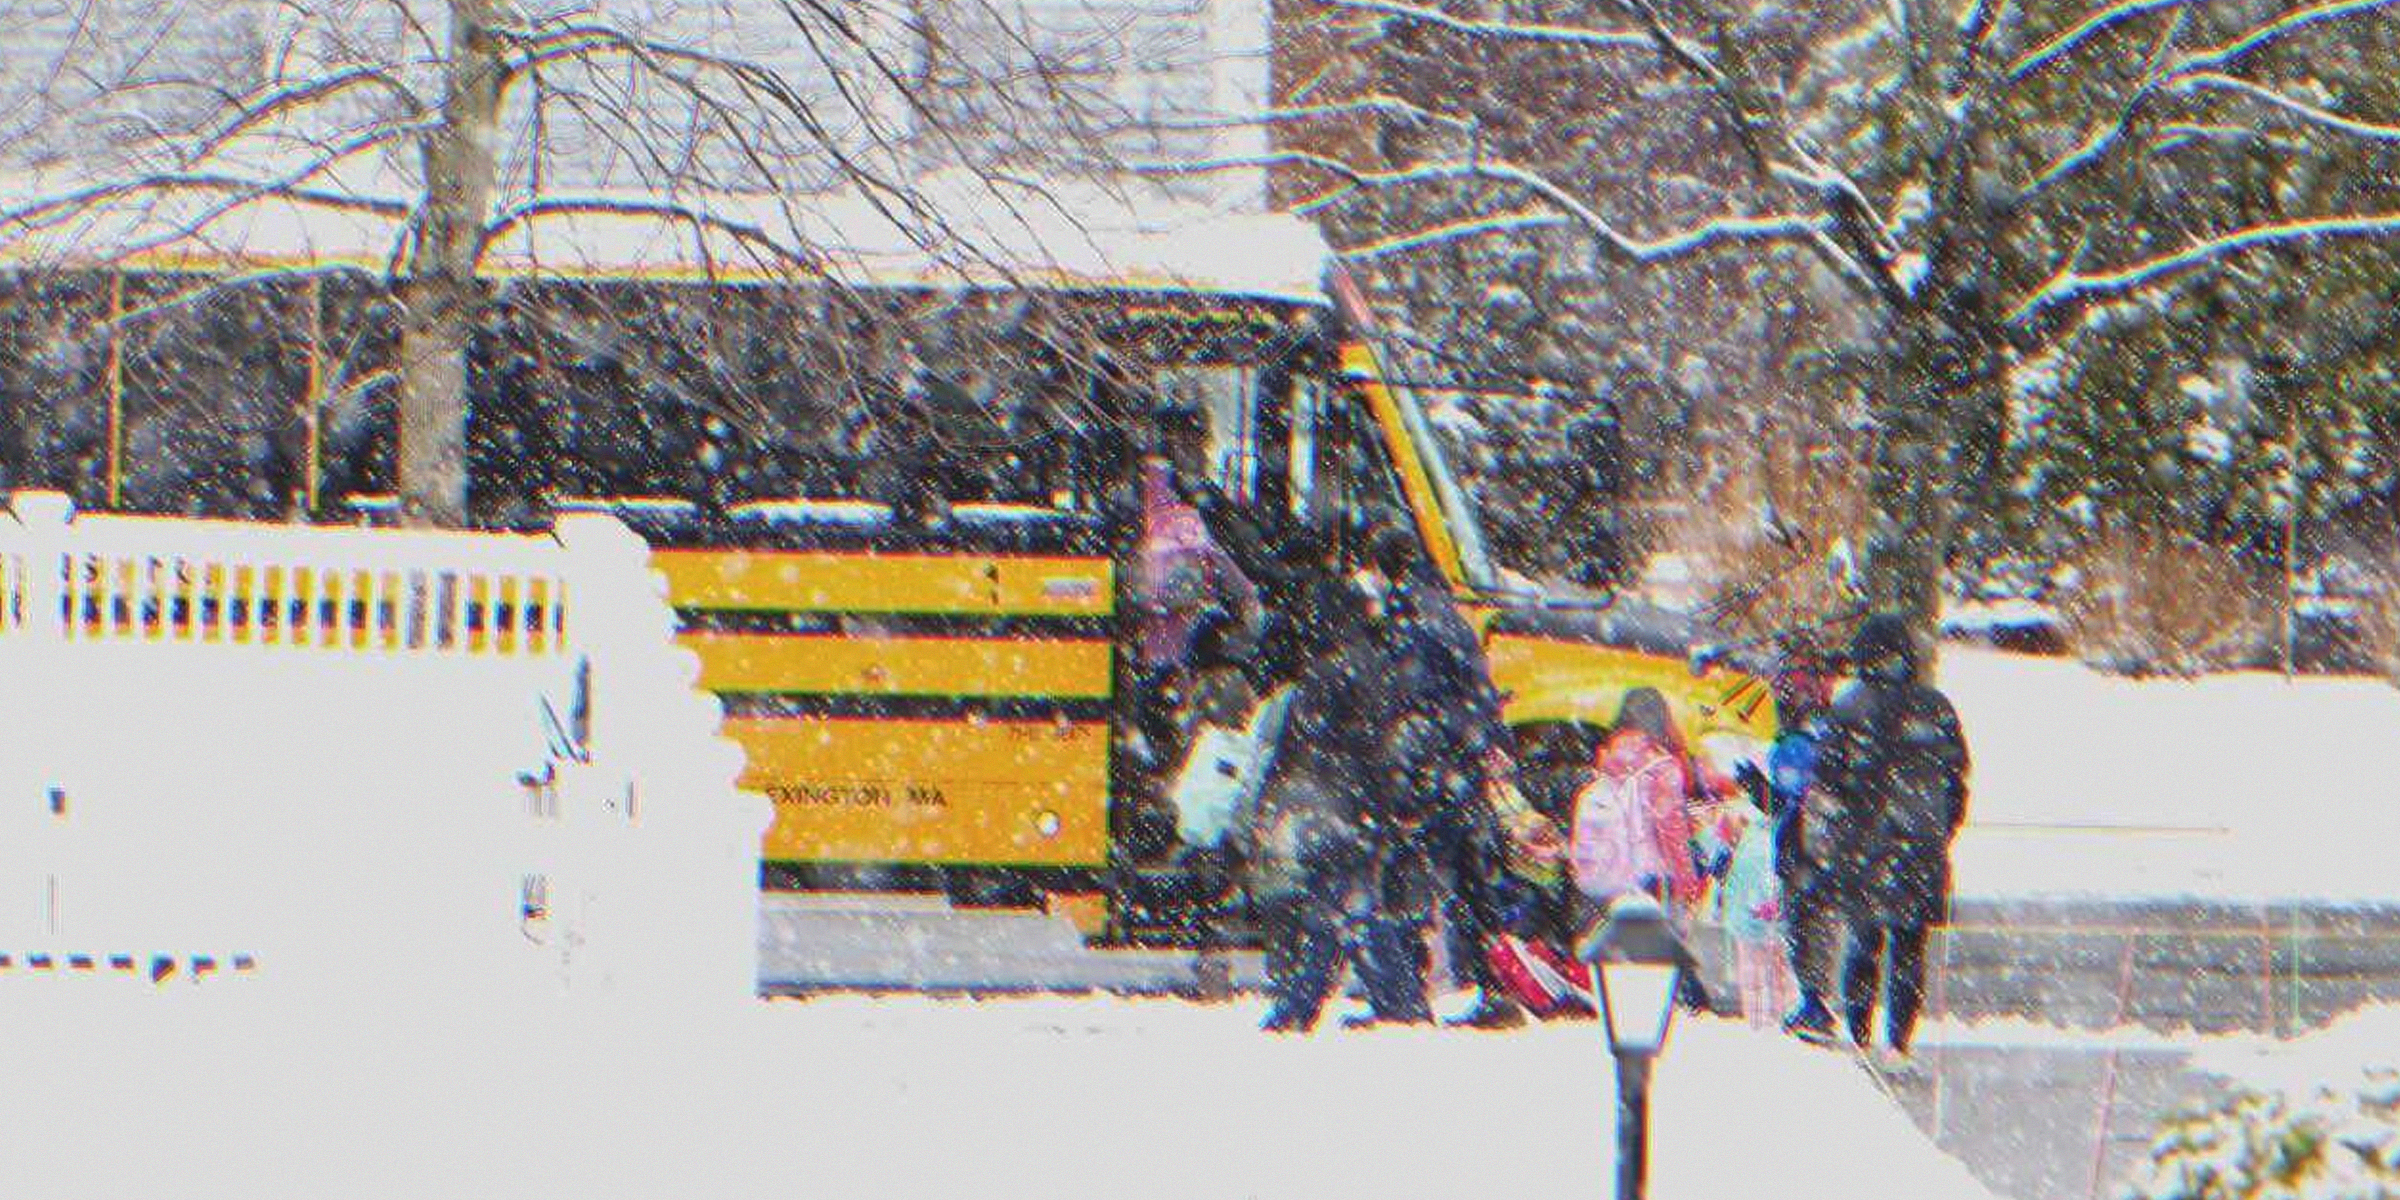 A boy in kindergarten boarded the bus without knowing his mom was supposed to pick him up. | Source: Shutterstock